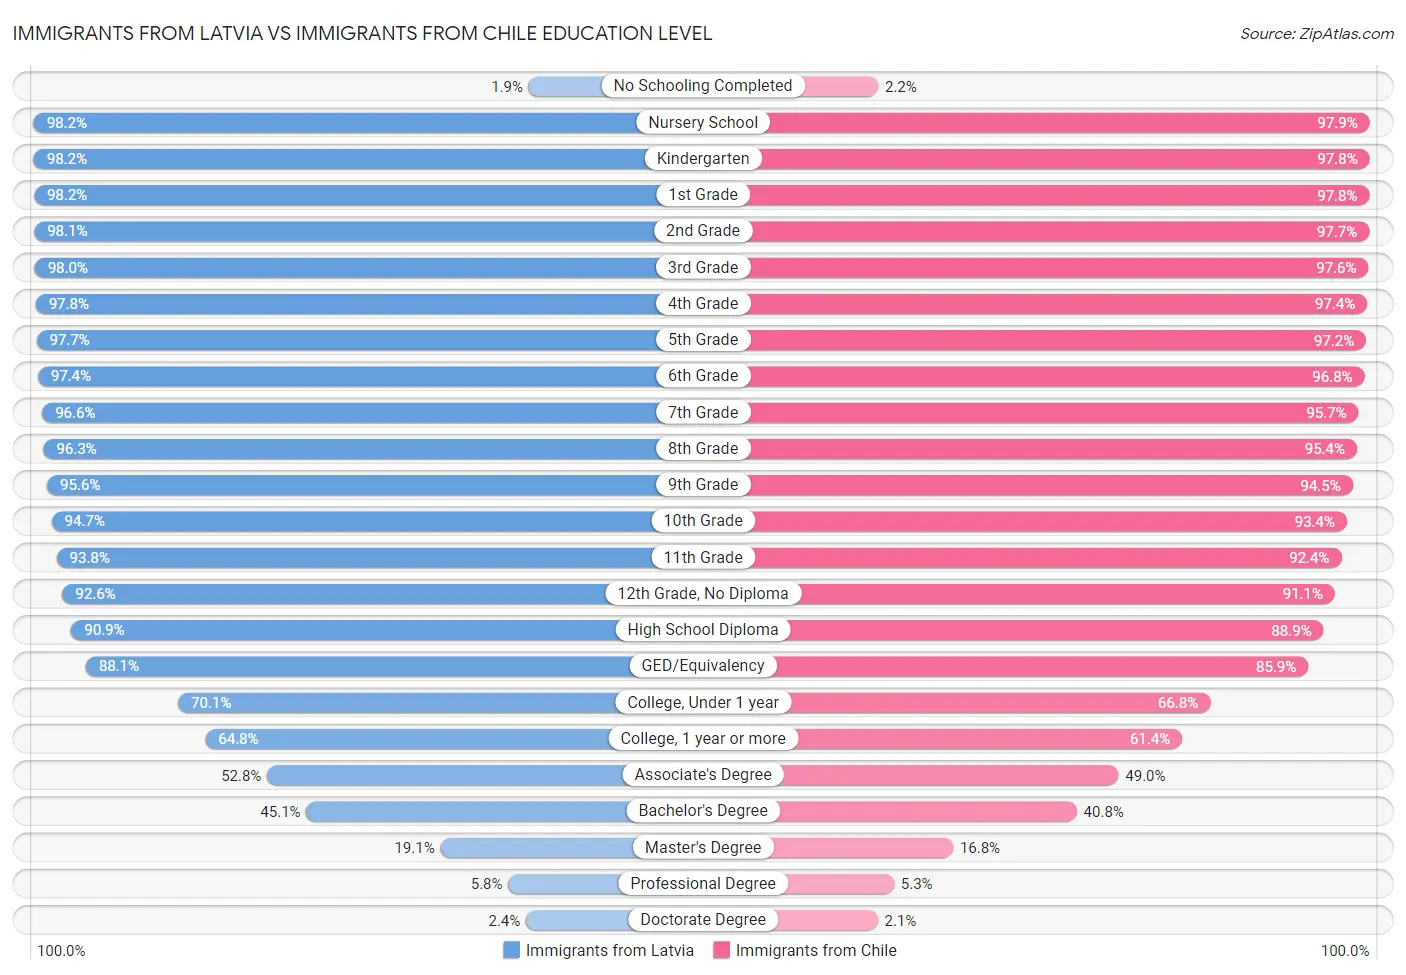 Immigrants from Latvia vs Immigrants from Chile Education Level